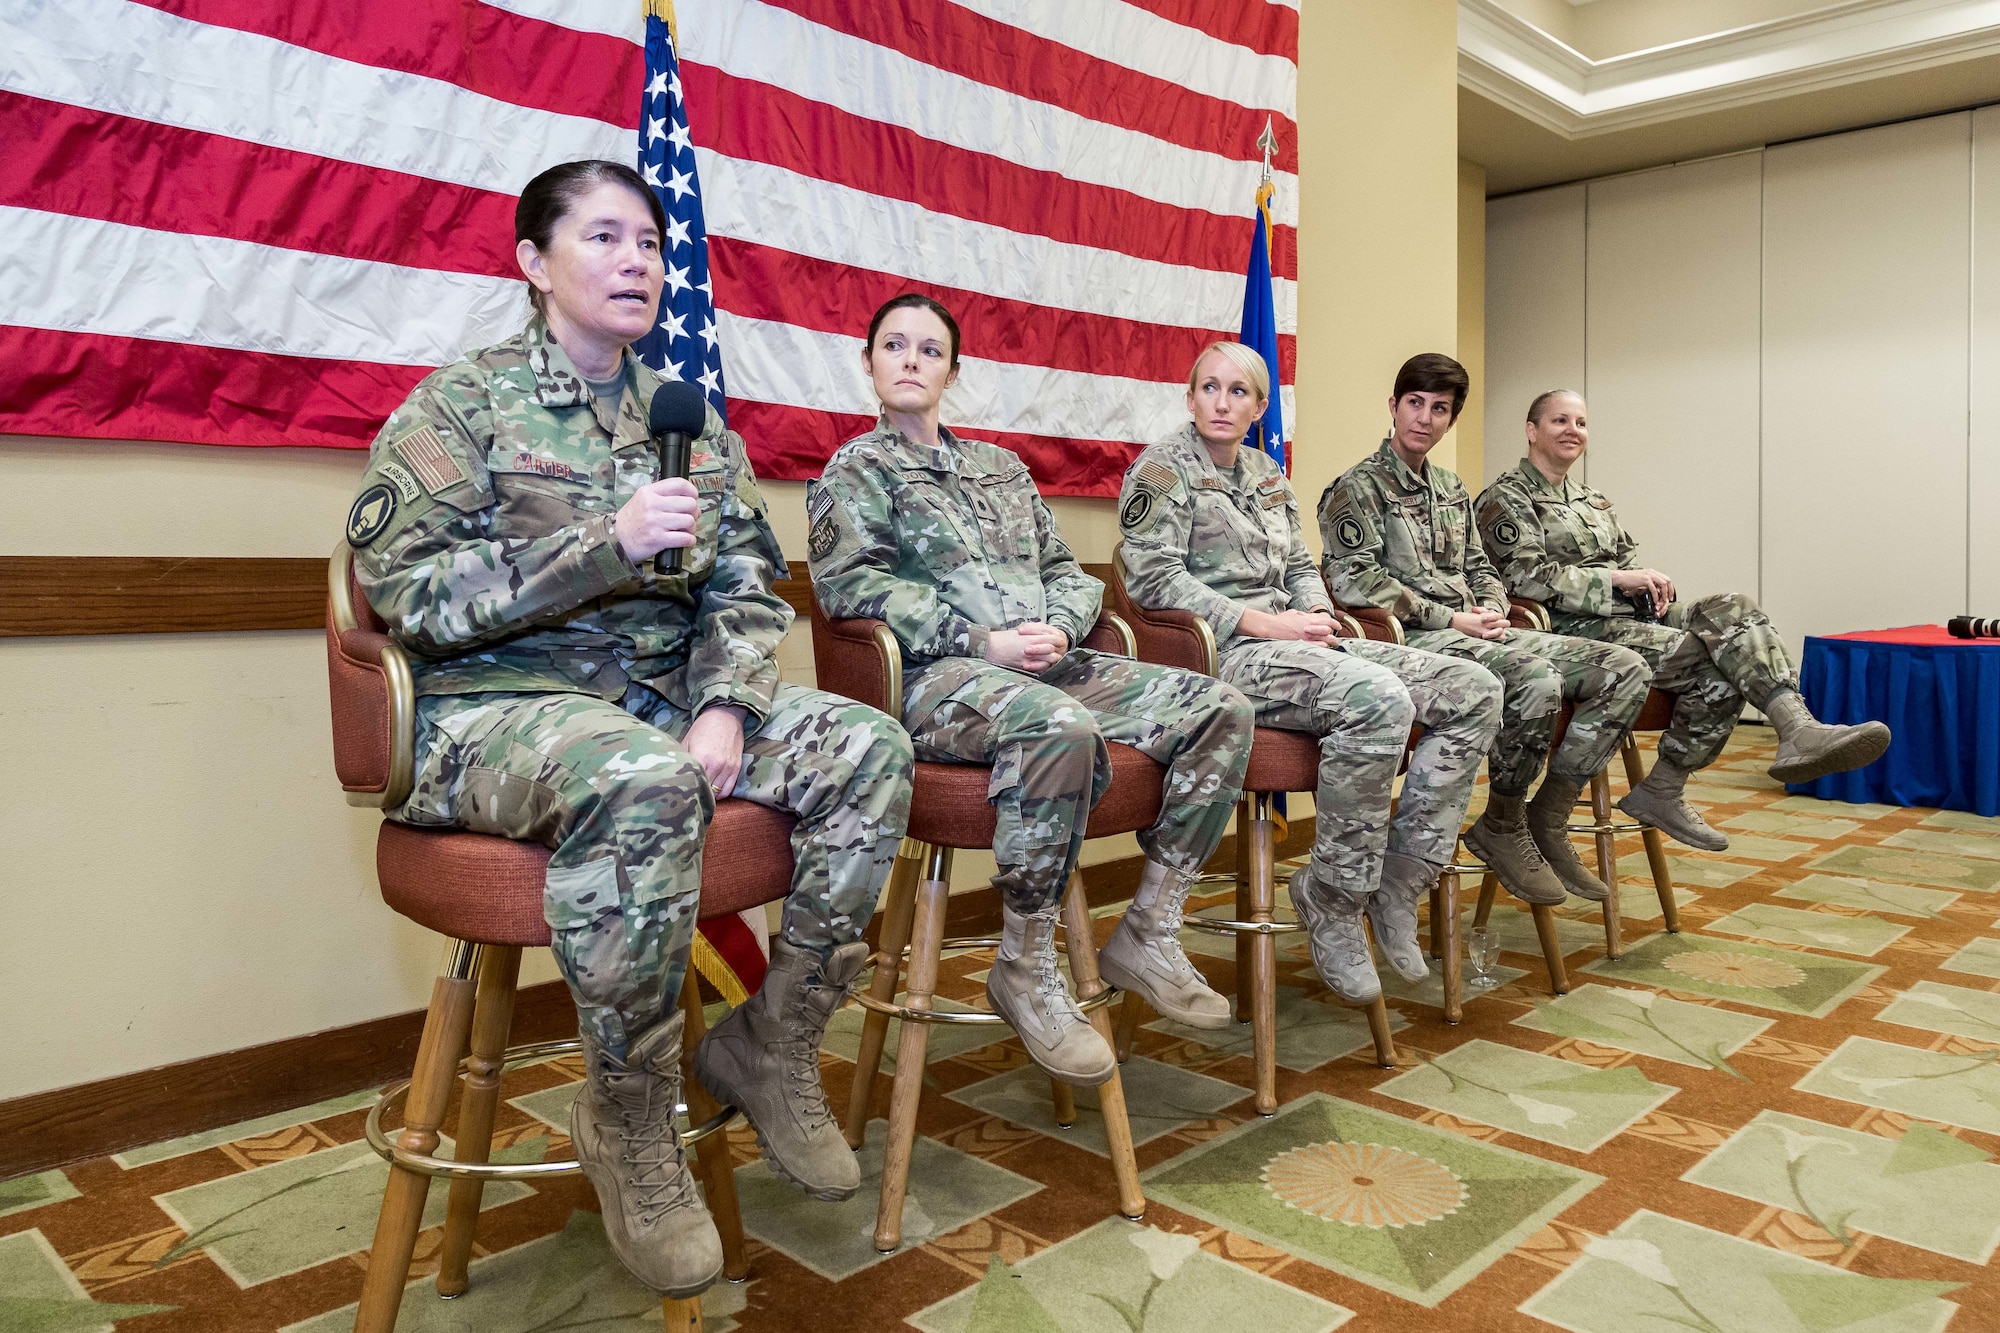 Five women speaking at a conference